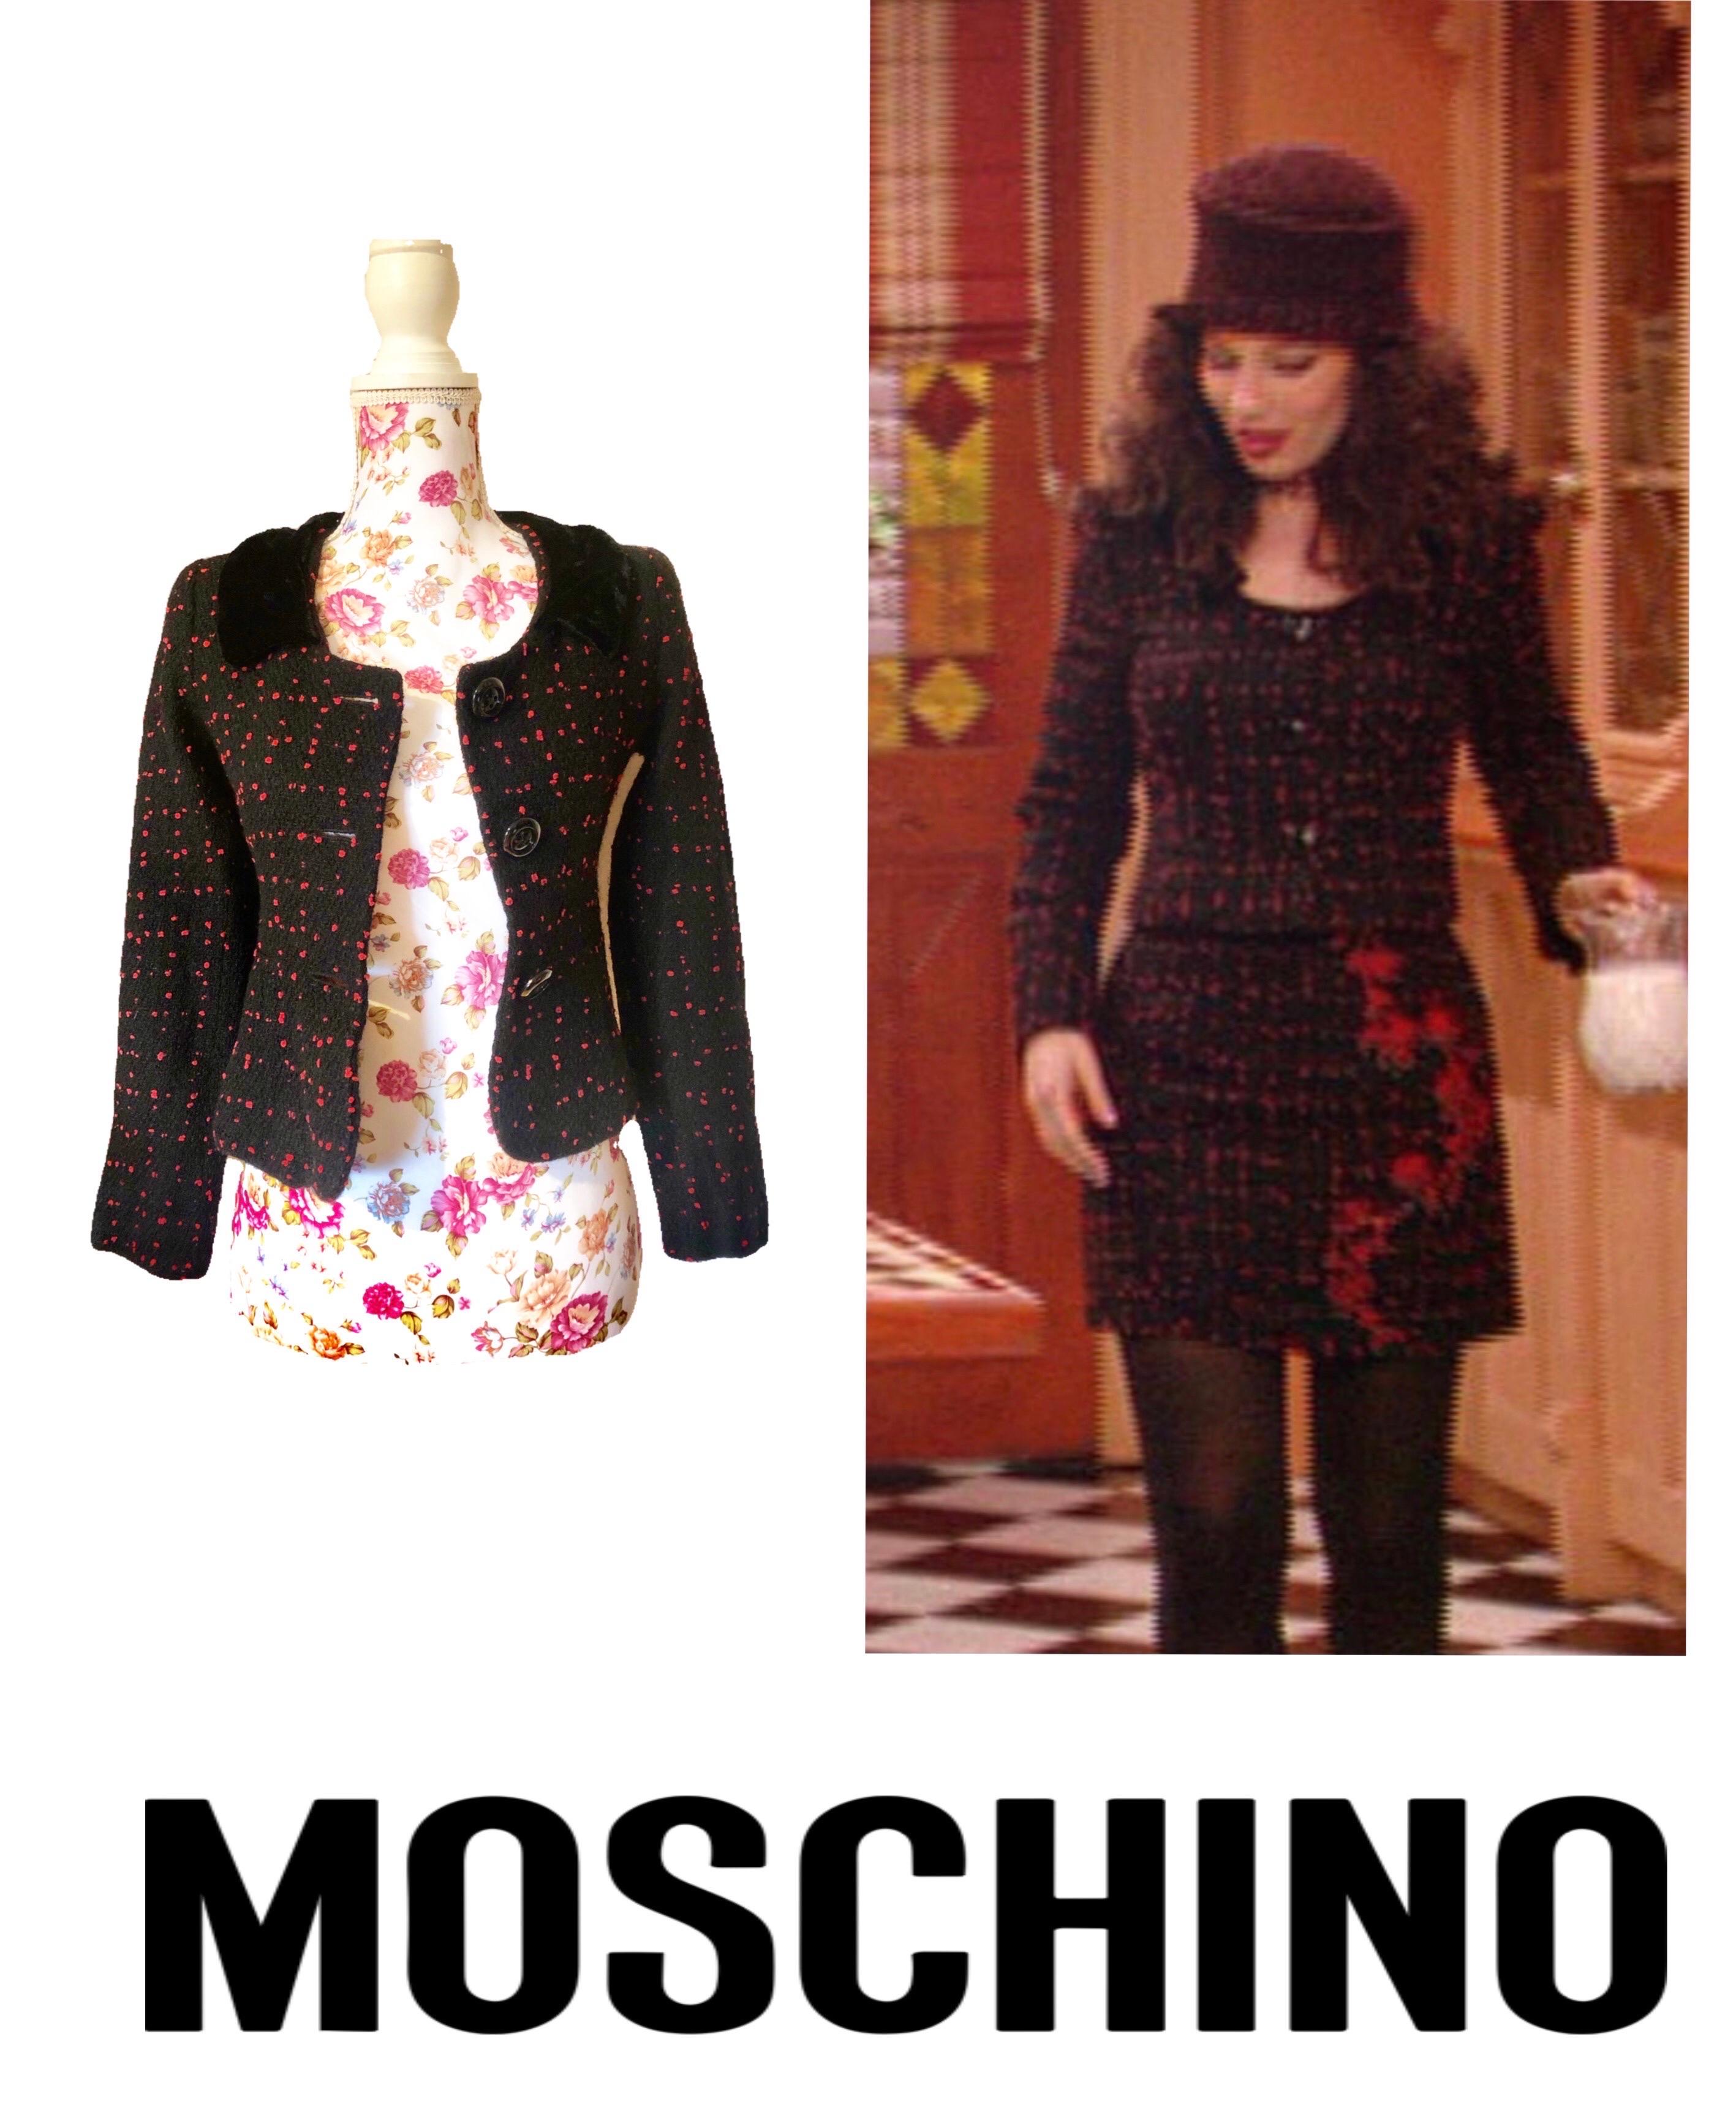 1990´s vintage wool jacket by Moschino cheap & chic, it has been  worn by Fran fine on the hit sitcom the Nanny. It is in Immaculate condition With beautiful velvet collar. Make sure you check the measurements as it runs small.

sizes
Fr 36
US 6
UK